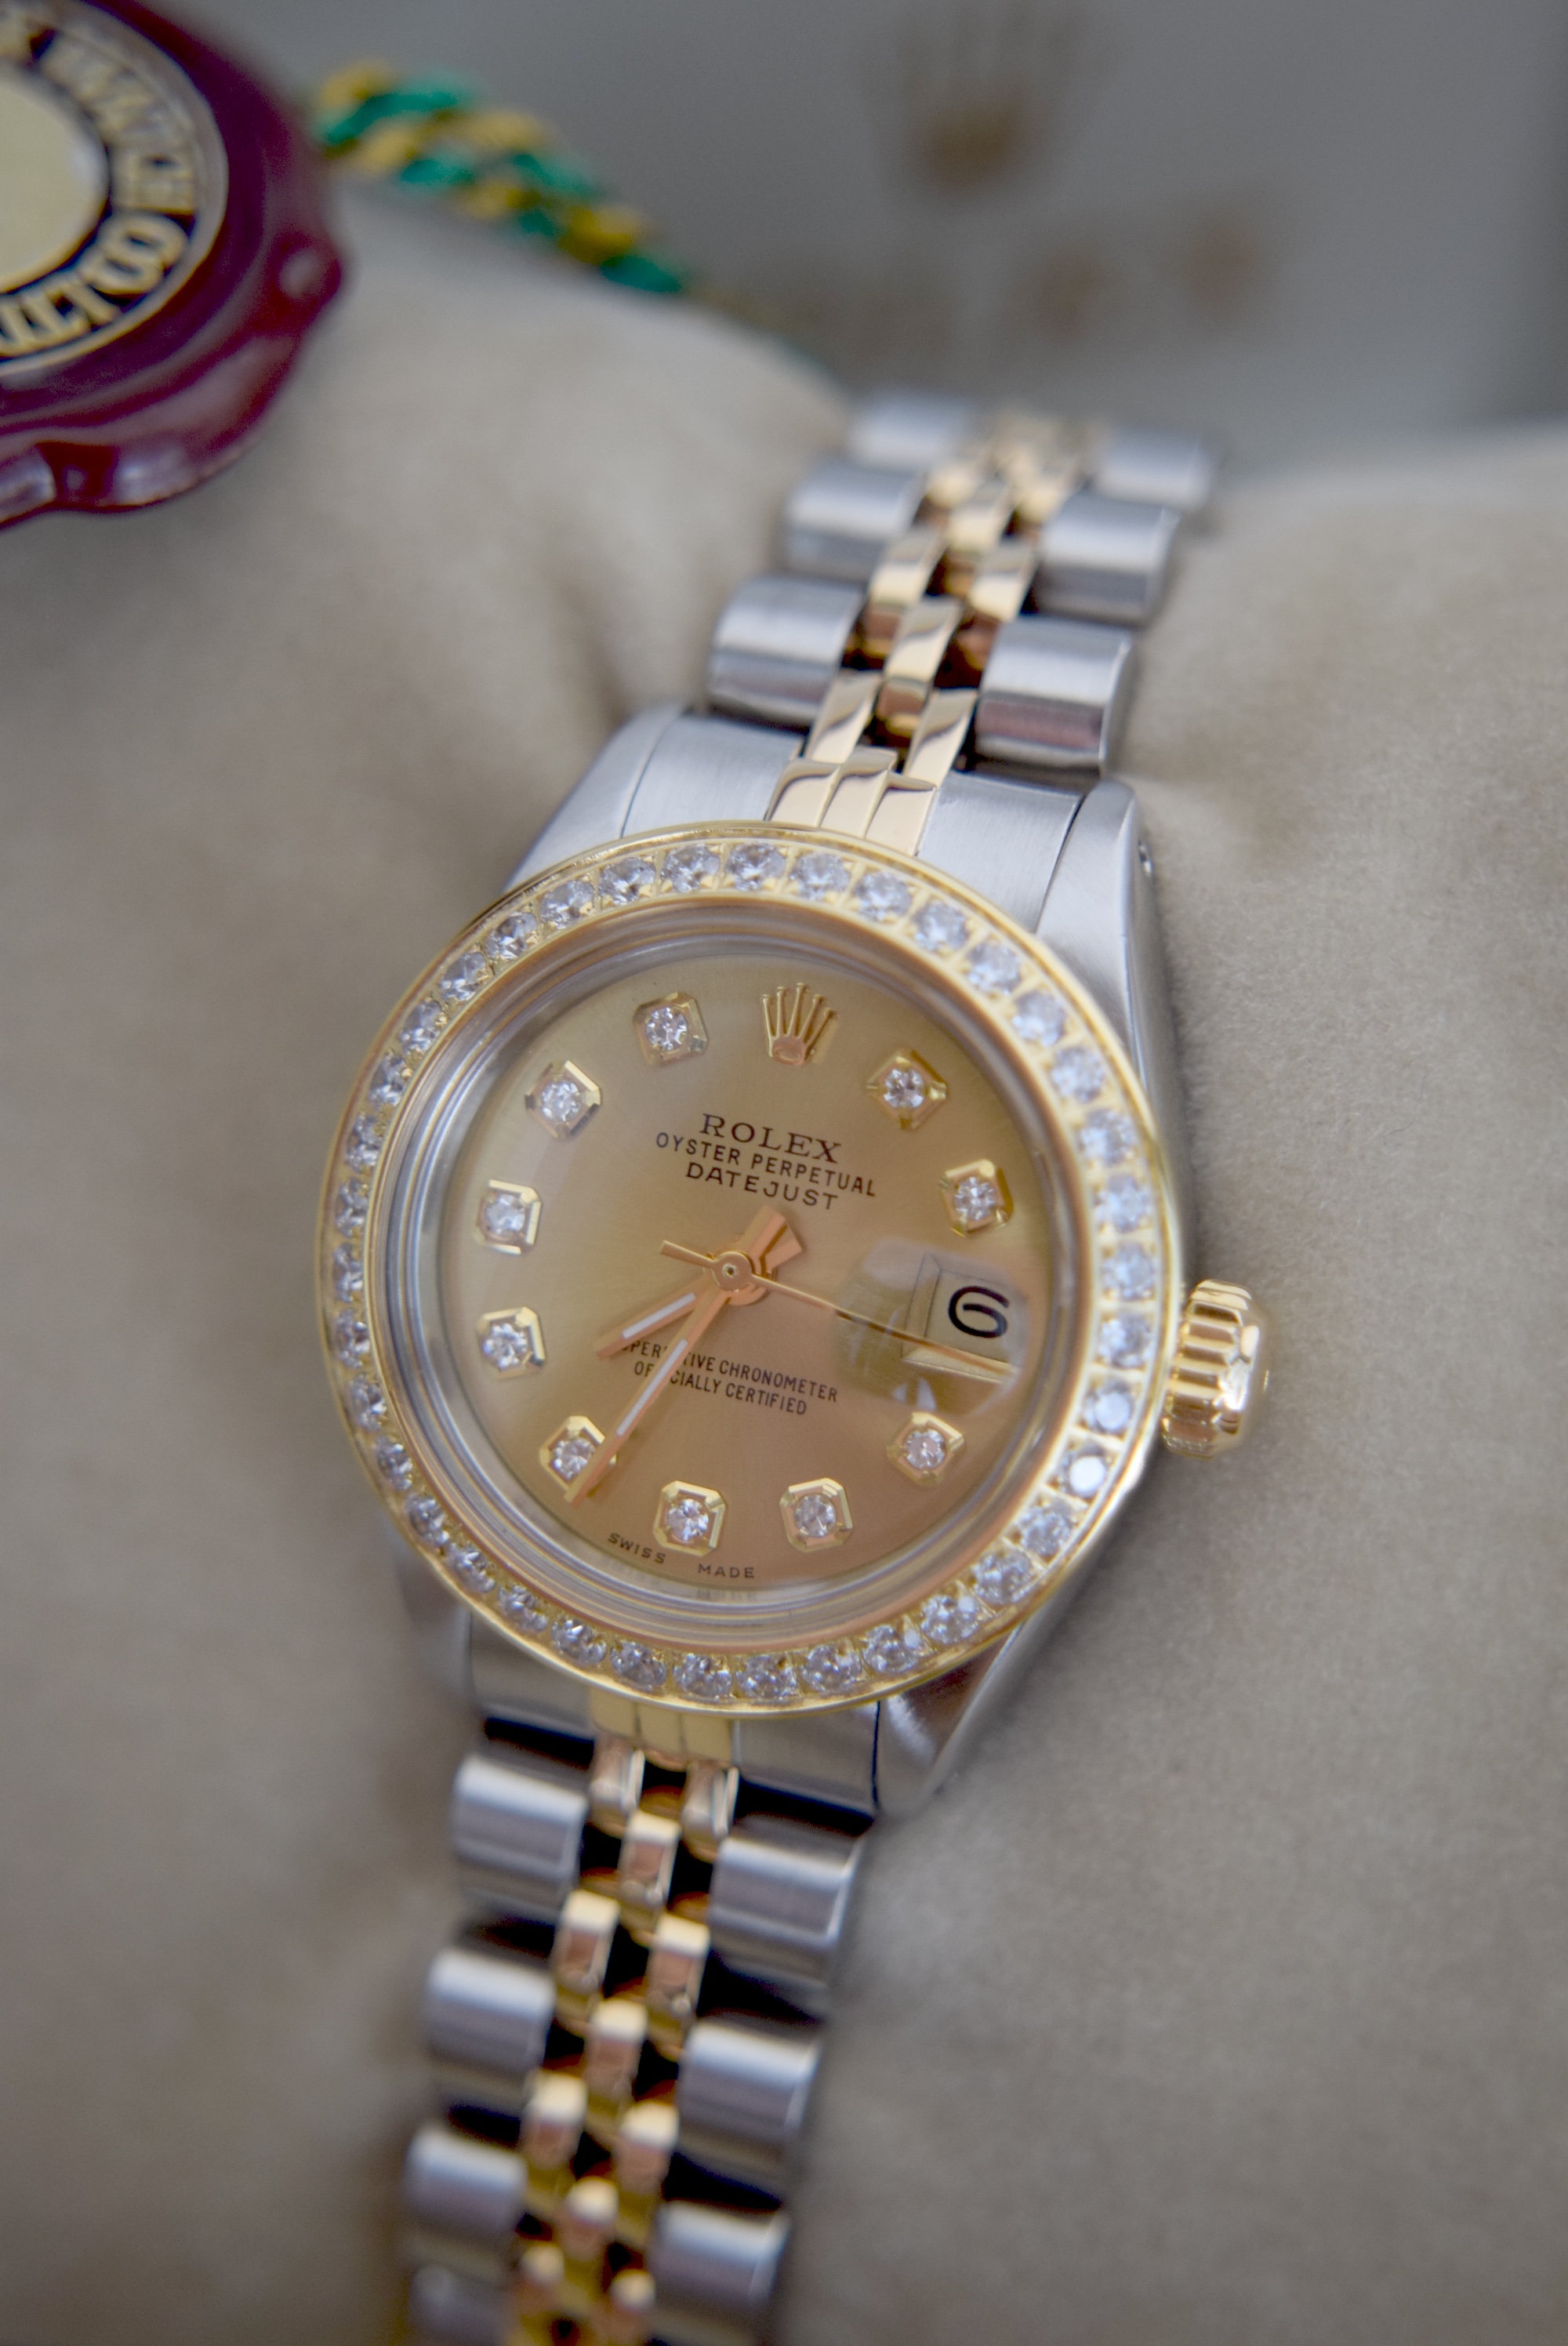 ROLEX 18CT YELLOW GOLD/ STEEL DATEJUST REF. 6917 - CUSTOM CHAMPAGNE DIAL/ BEZEL - Image 3 of 24